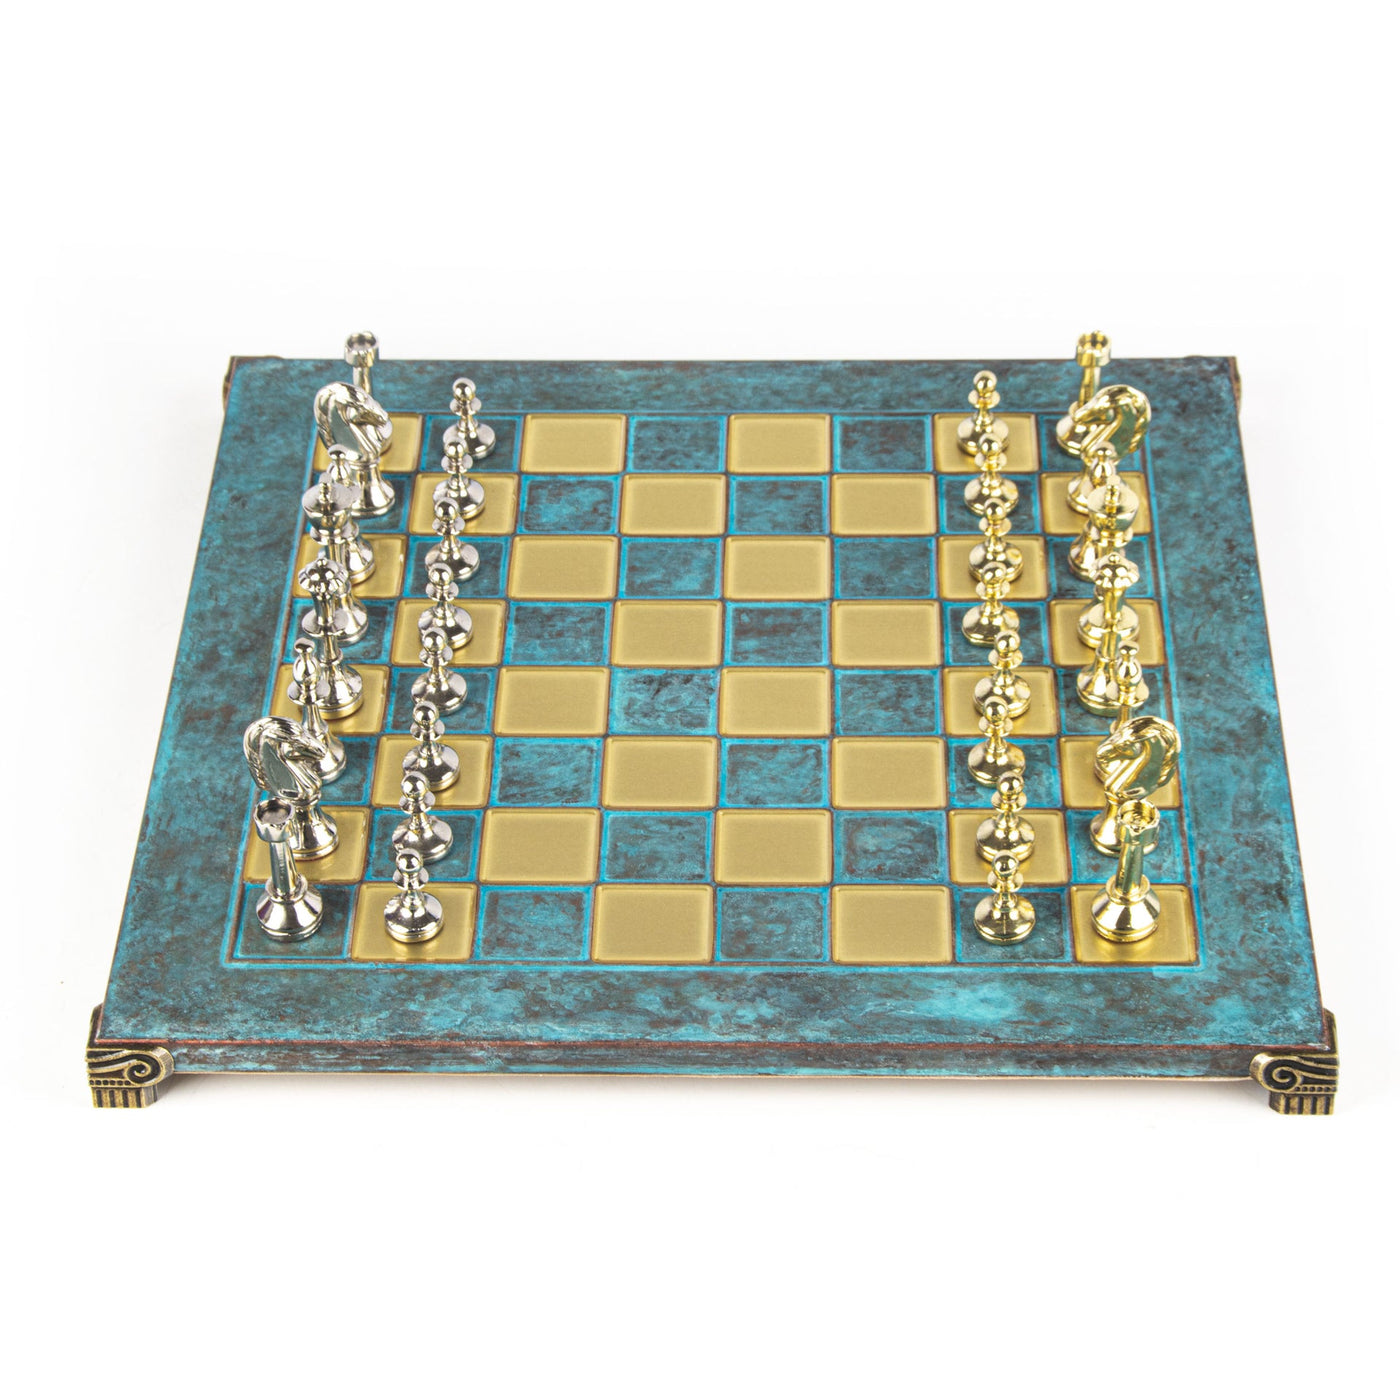 Classic Metal Staunton Chess set with Gold and Silver Chessmen and 36cm Chessboard i